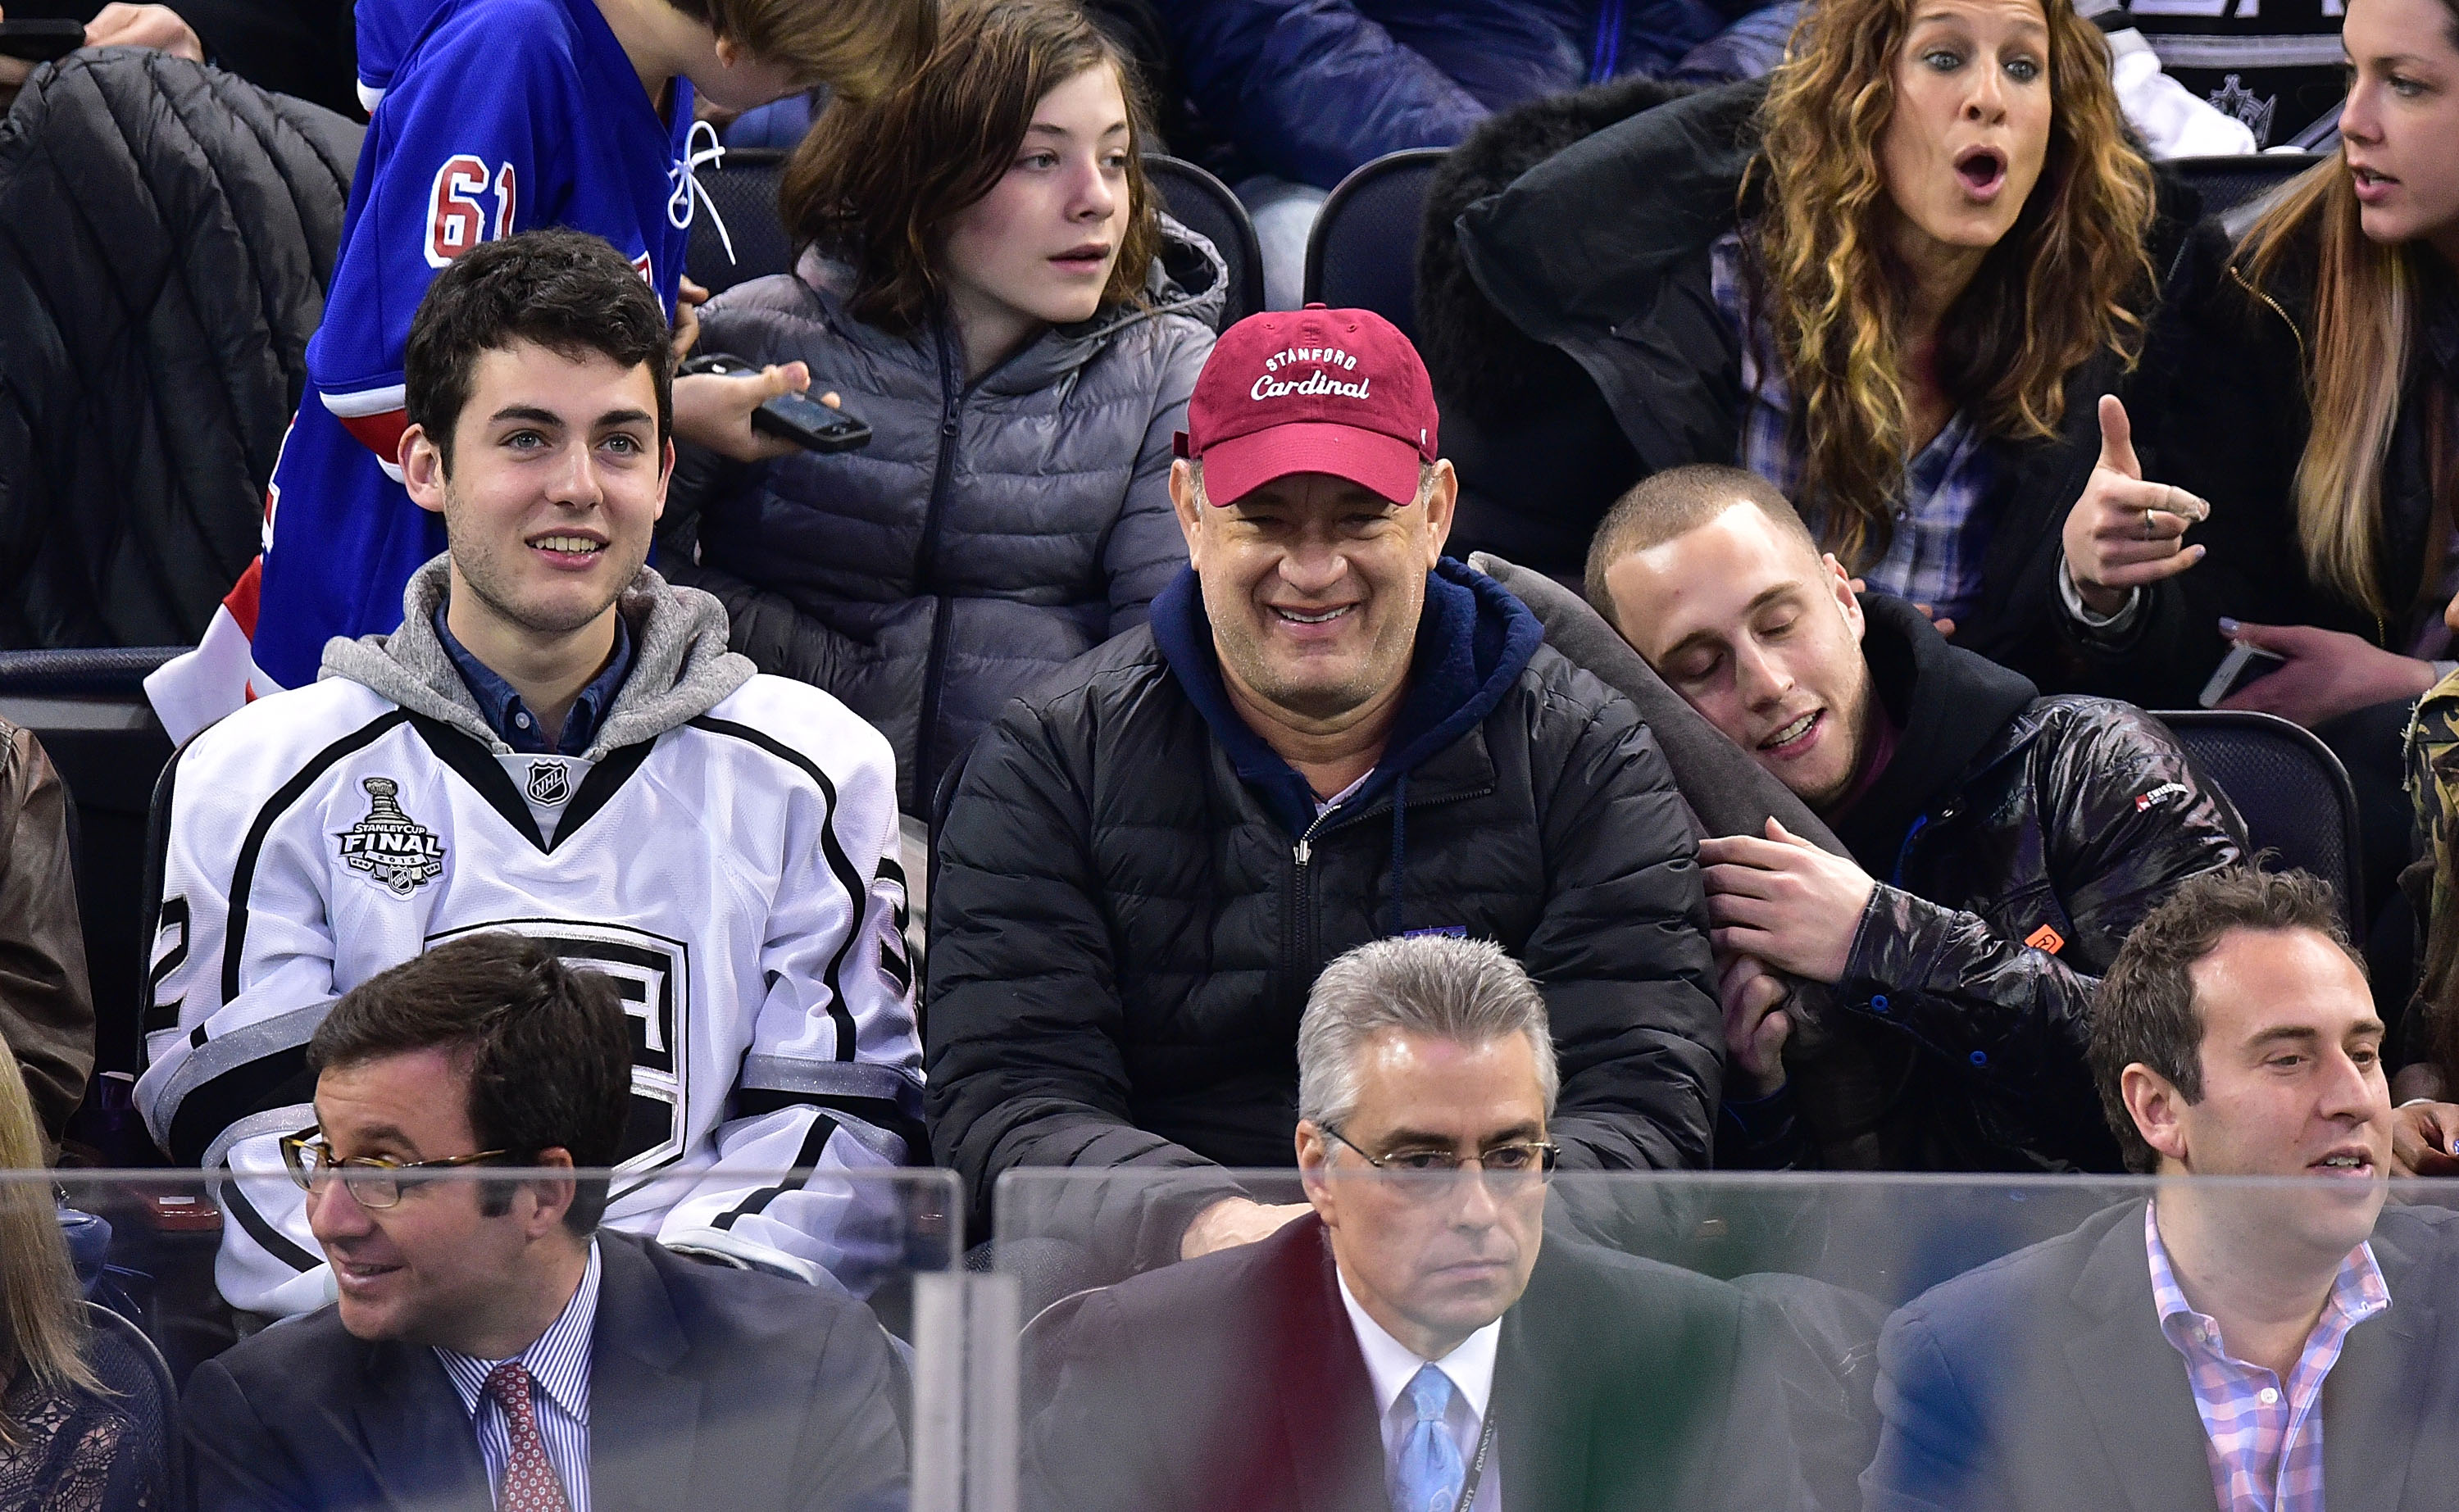  Truman Hanks, Tom Hanks and Chet Hanks on March 24, 2015 in New York City | Source: Getty Images